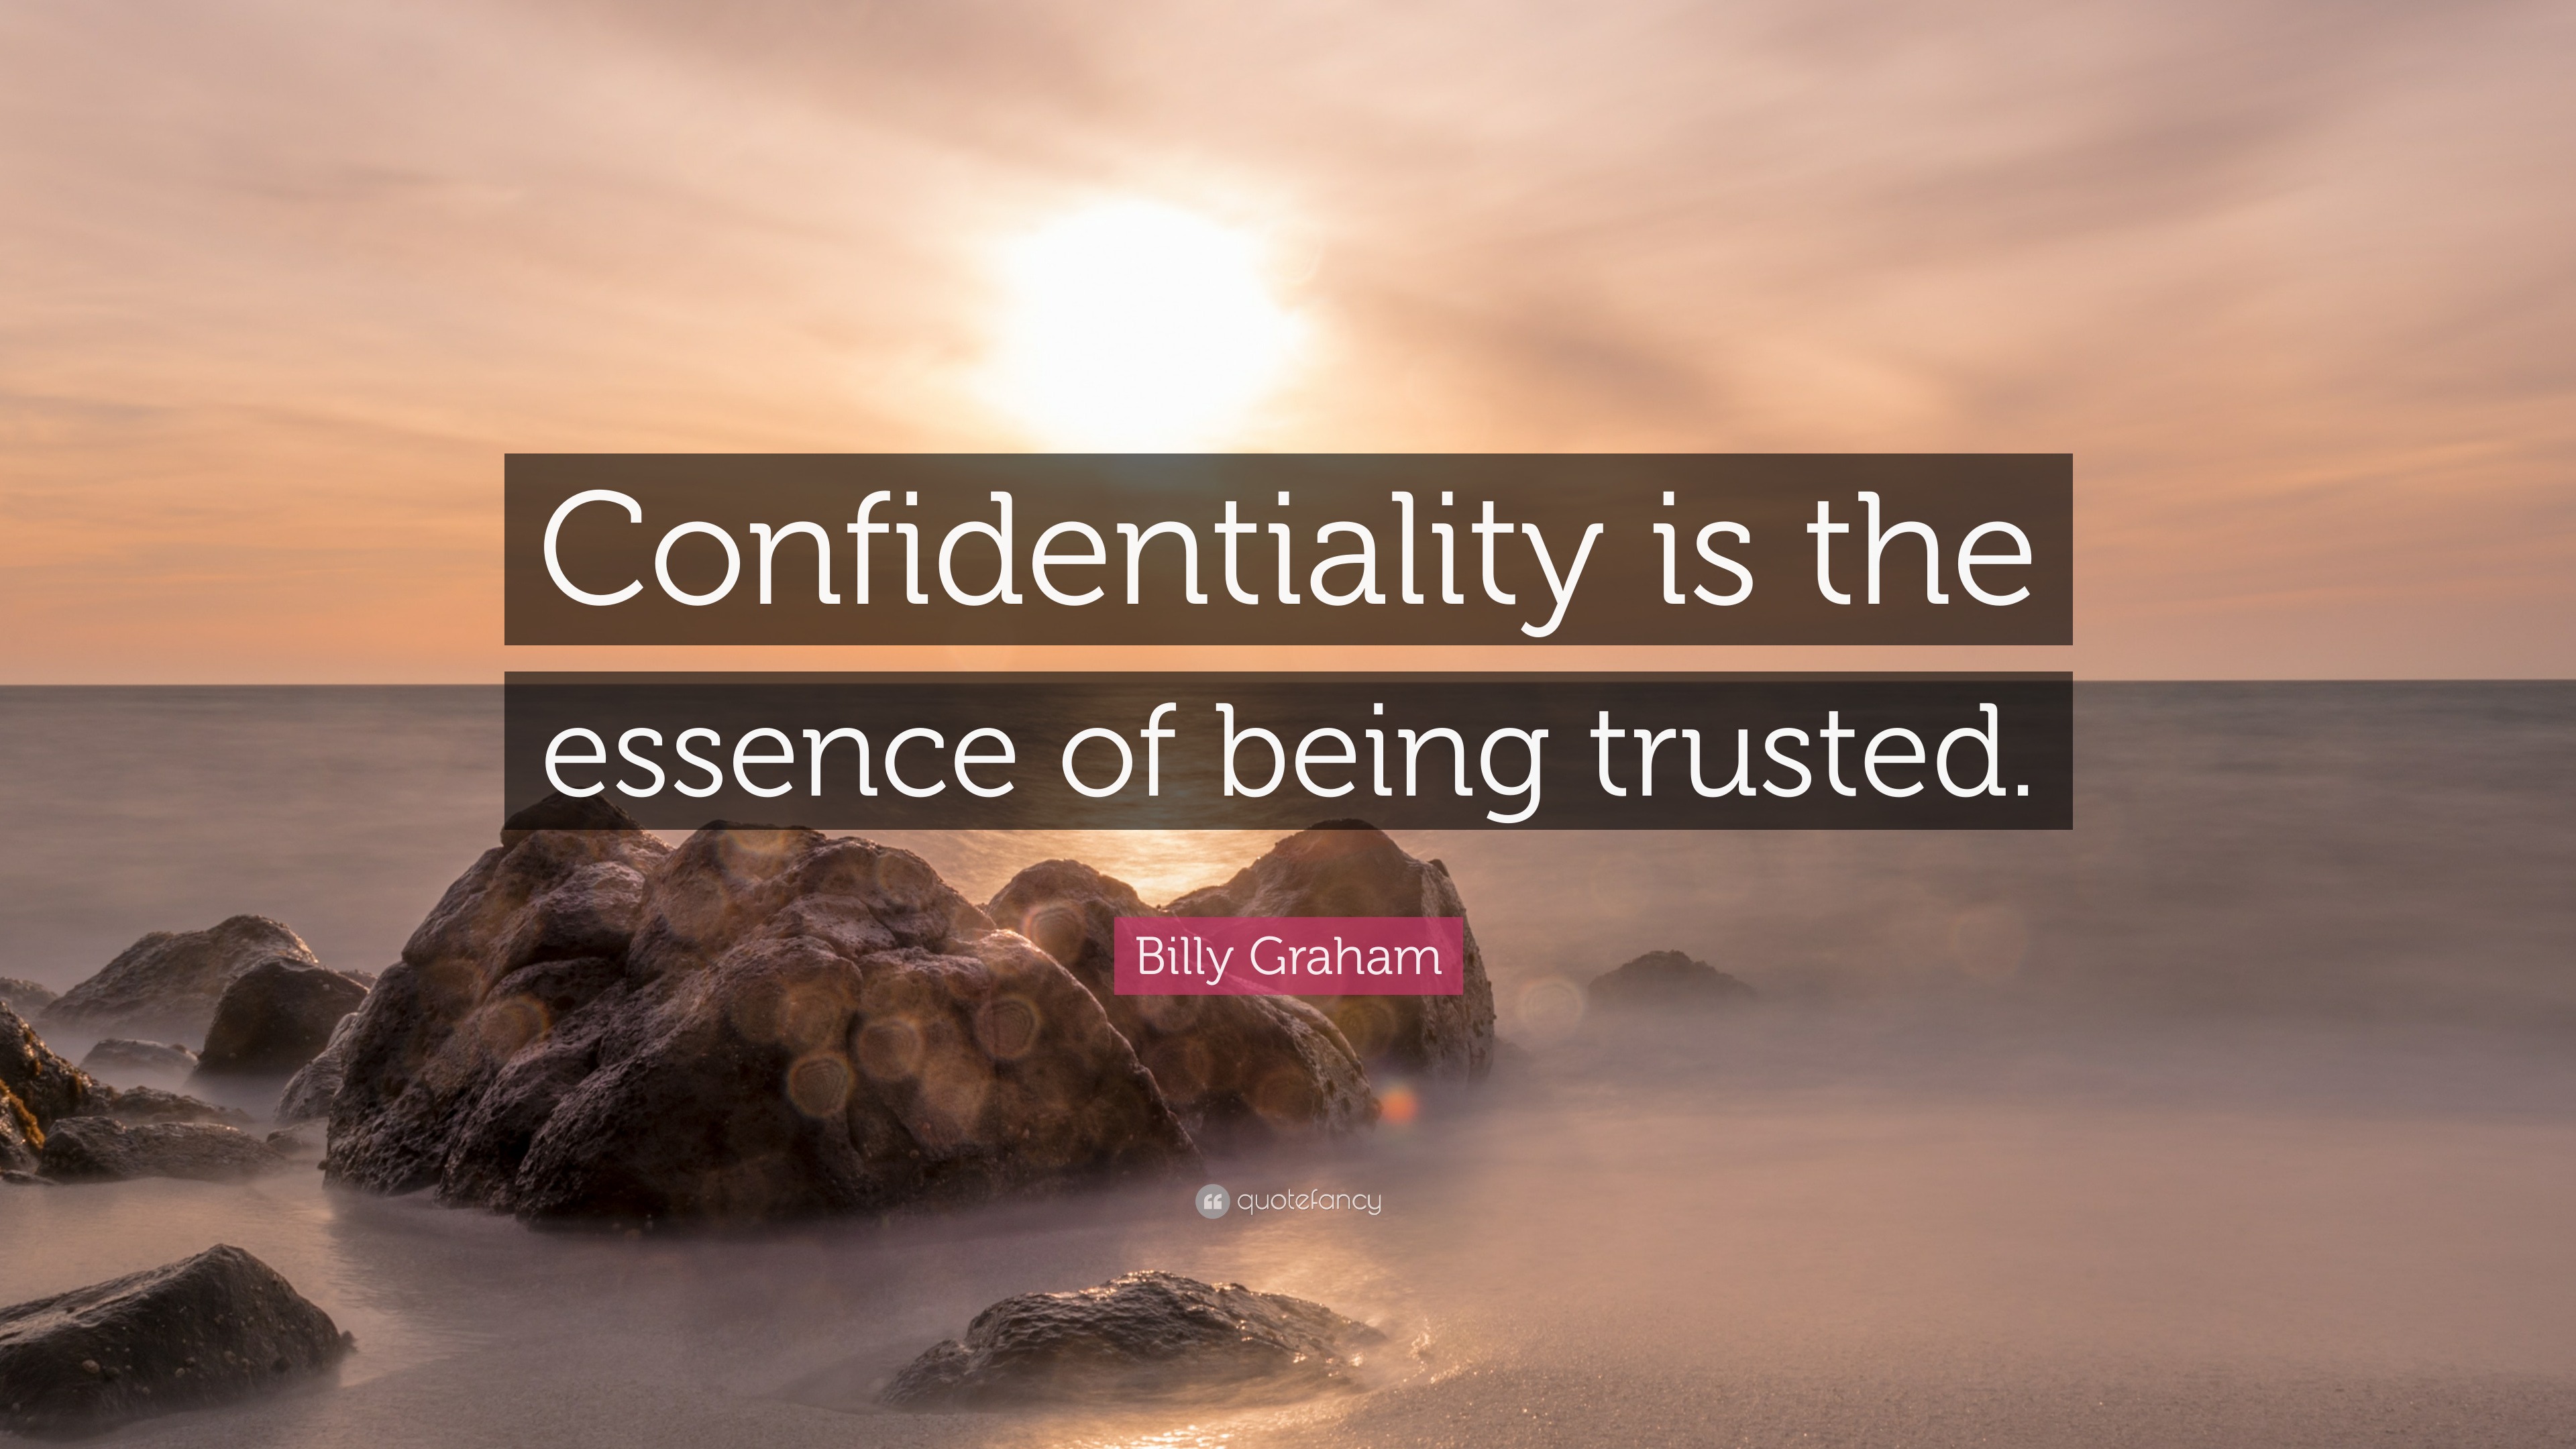 5047580 Billy Graham Quote Confidentiality Is The Essence Of Being Trusted 